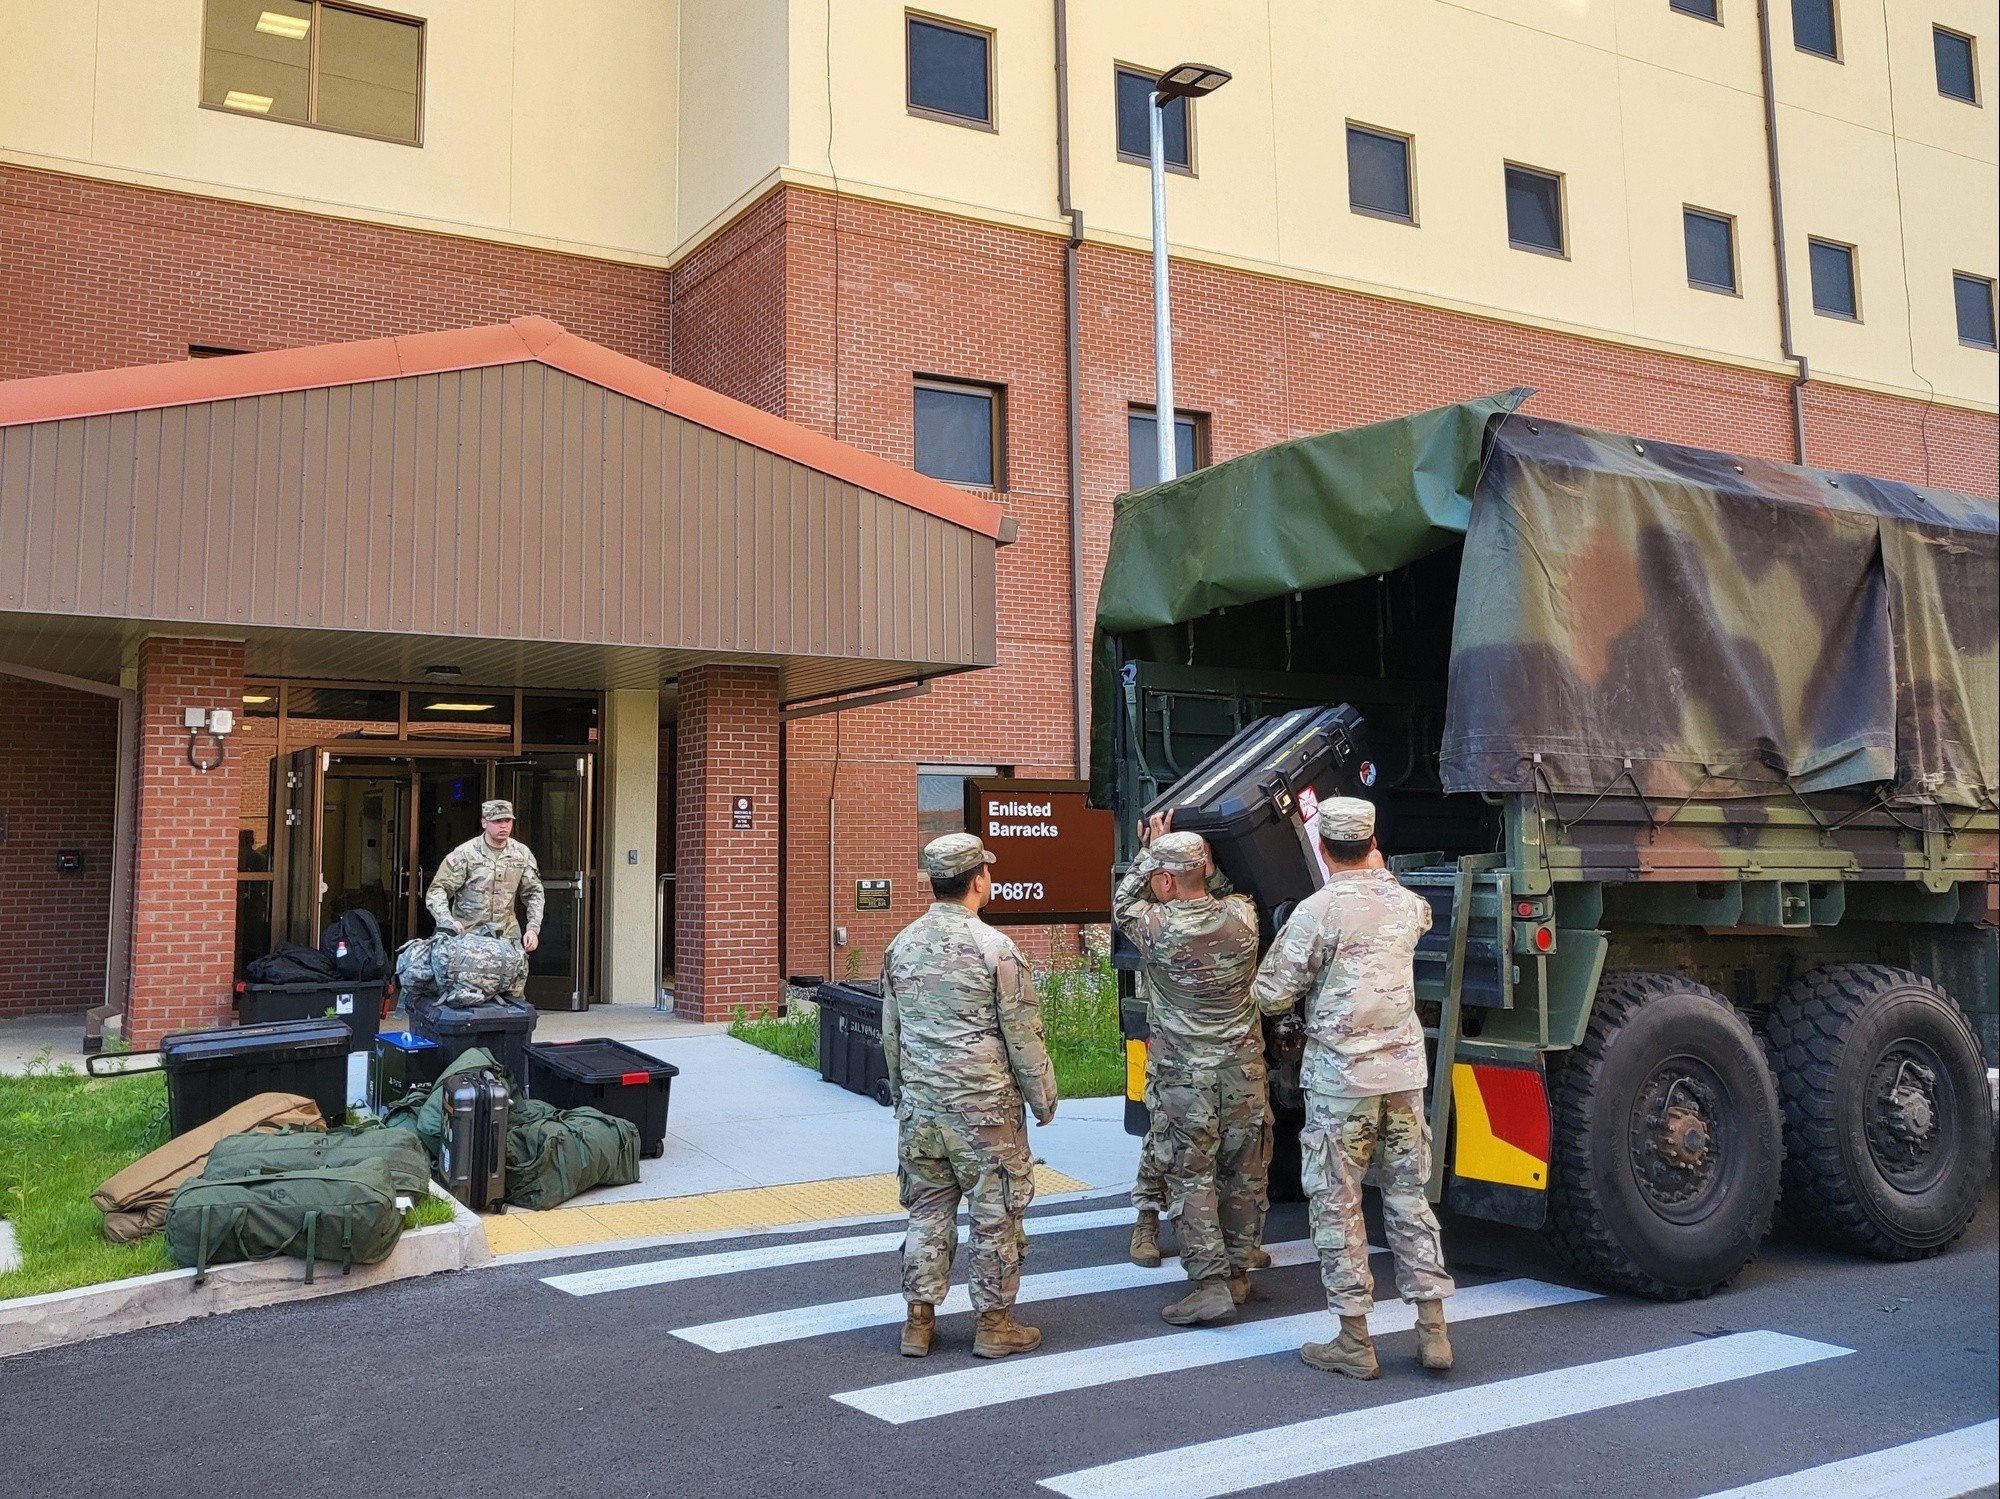 Soldiers move their belongings into a new barracks building on U.S. Army Garrison Humphreys, May 31, 2024. They bring their personnel items and equipment to their rooms, which have shared kitchens and bathrooms for every two Soldiers, along with four gazebos and a barbecue shelter outside. (US Army photo by Kim Chong-yun) (Chong Yun Kim)